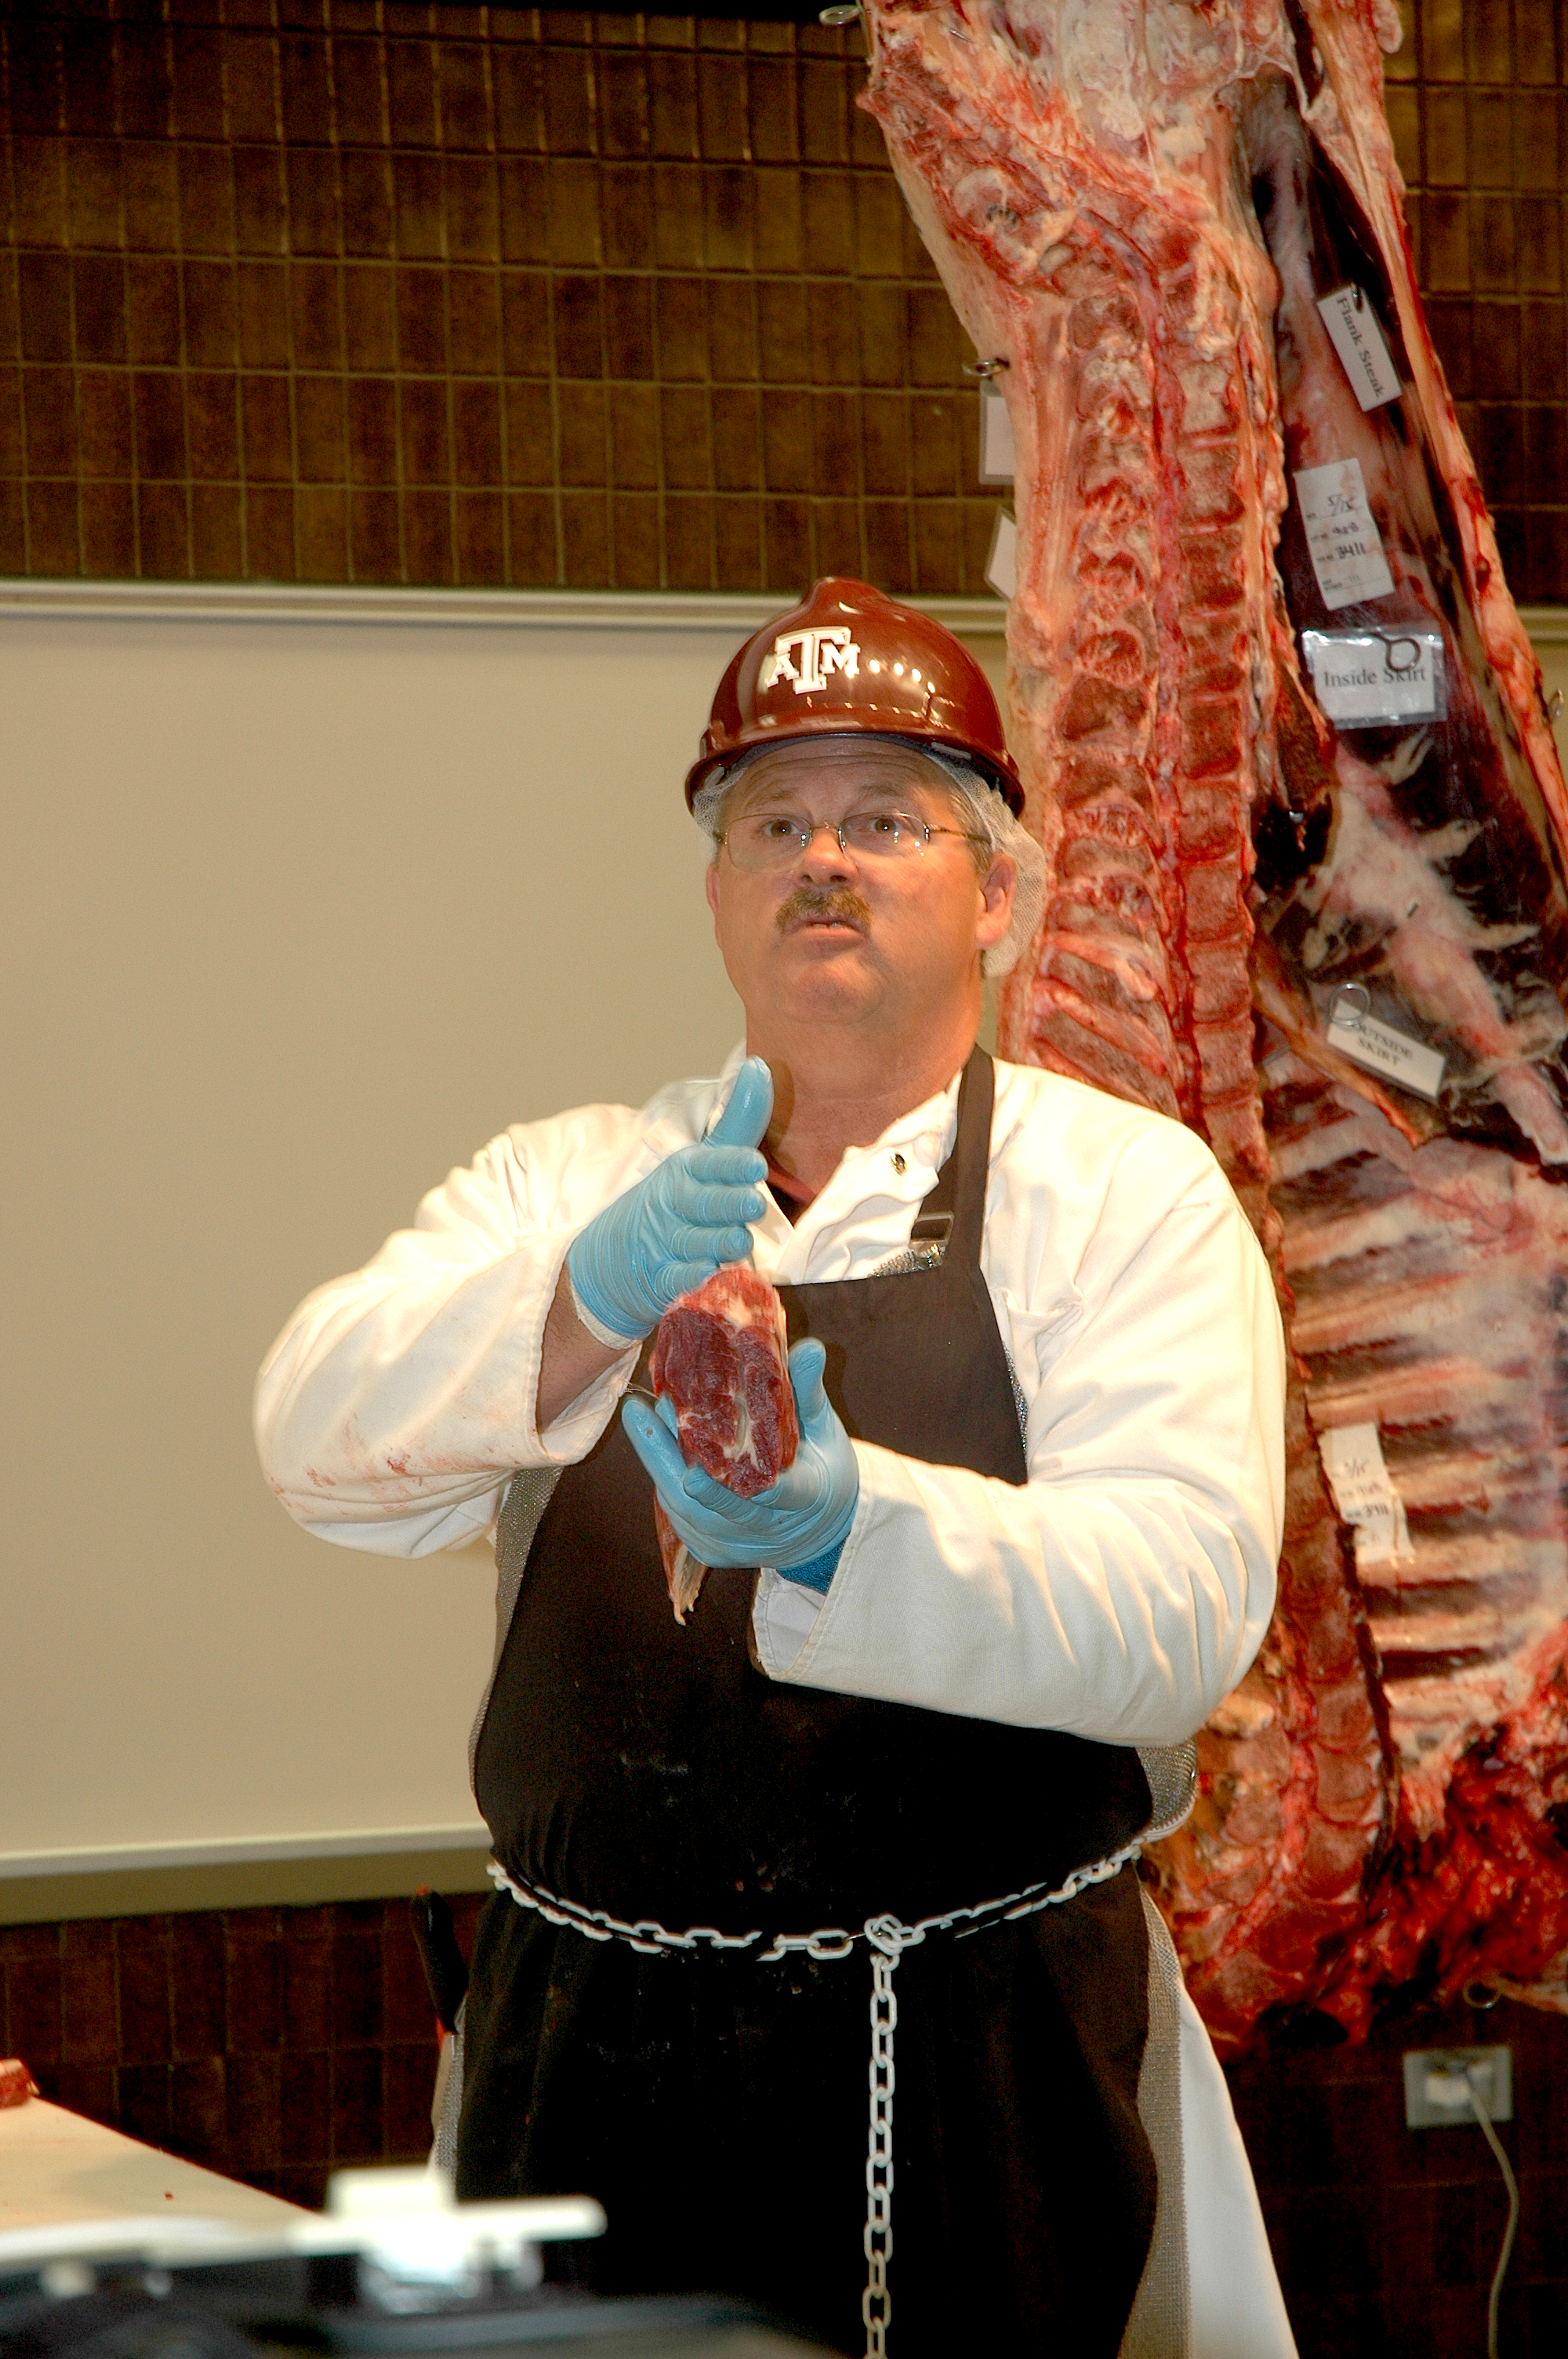 Youth can learn more about the beef industry, including a virtual tour of a feedlot and packing operations, during a special hands-on program held in conjunction with the Texas A&M Beef Cattle Short Course on Aug. 1-2 at Texas A&M University in College Station. 